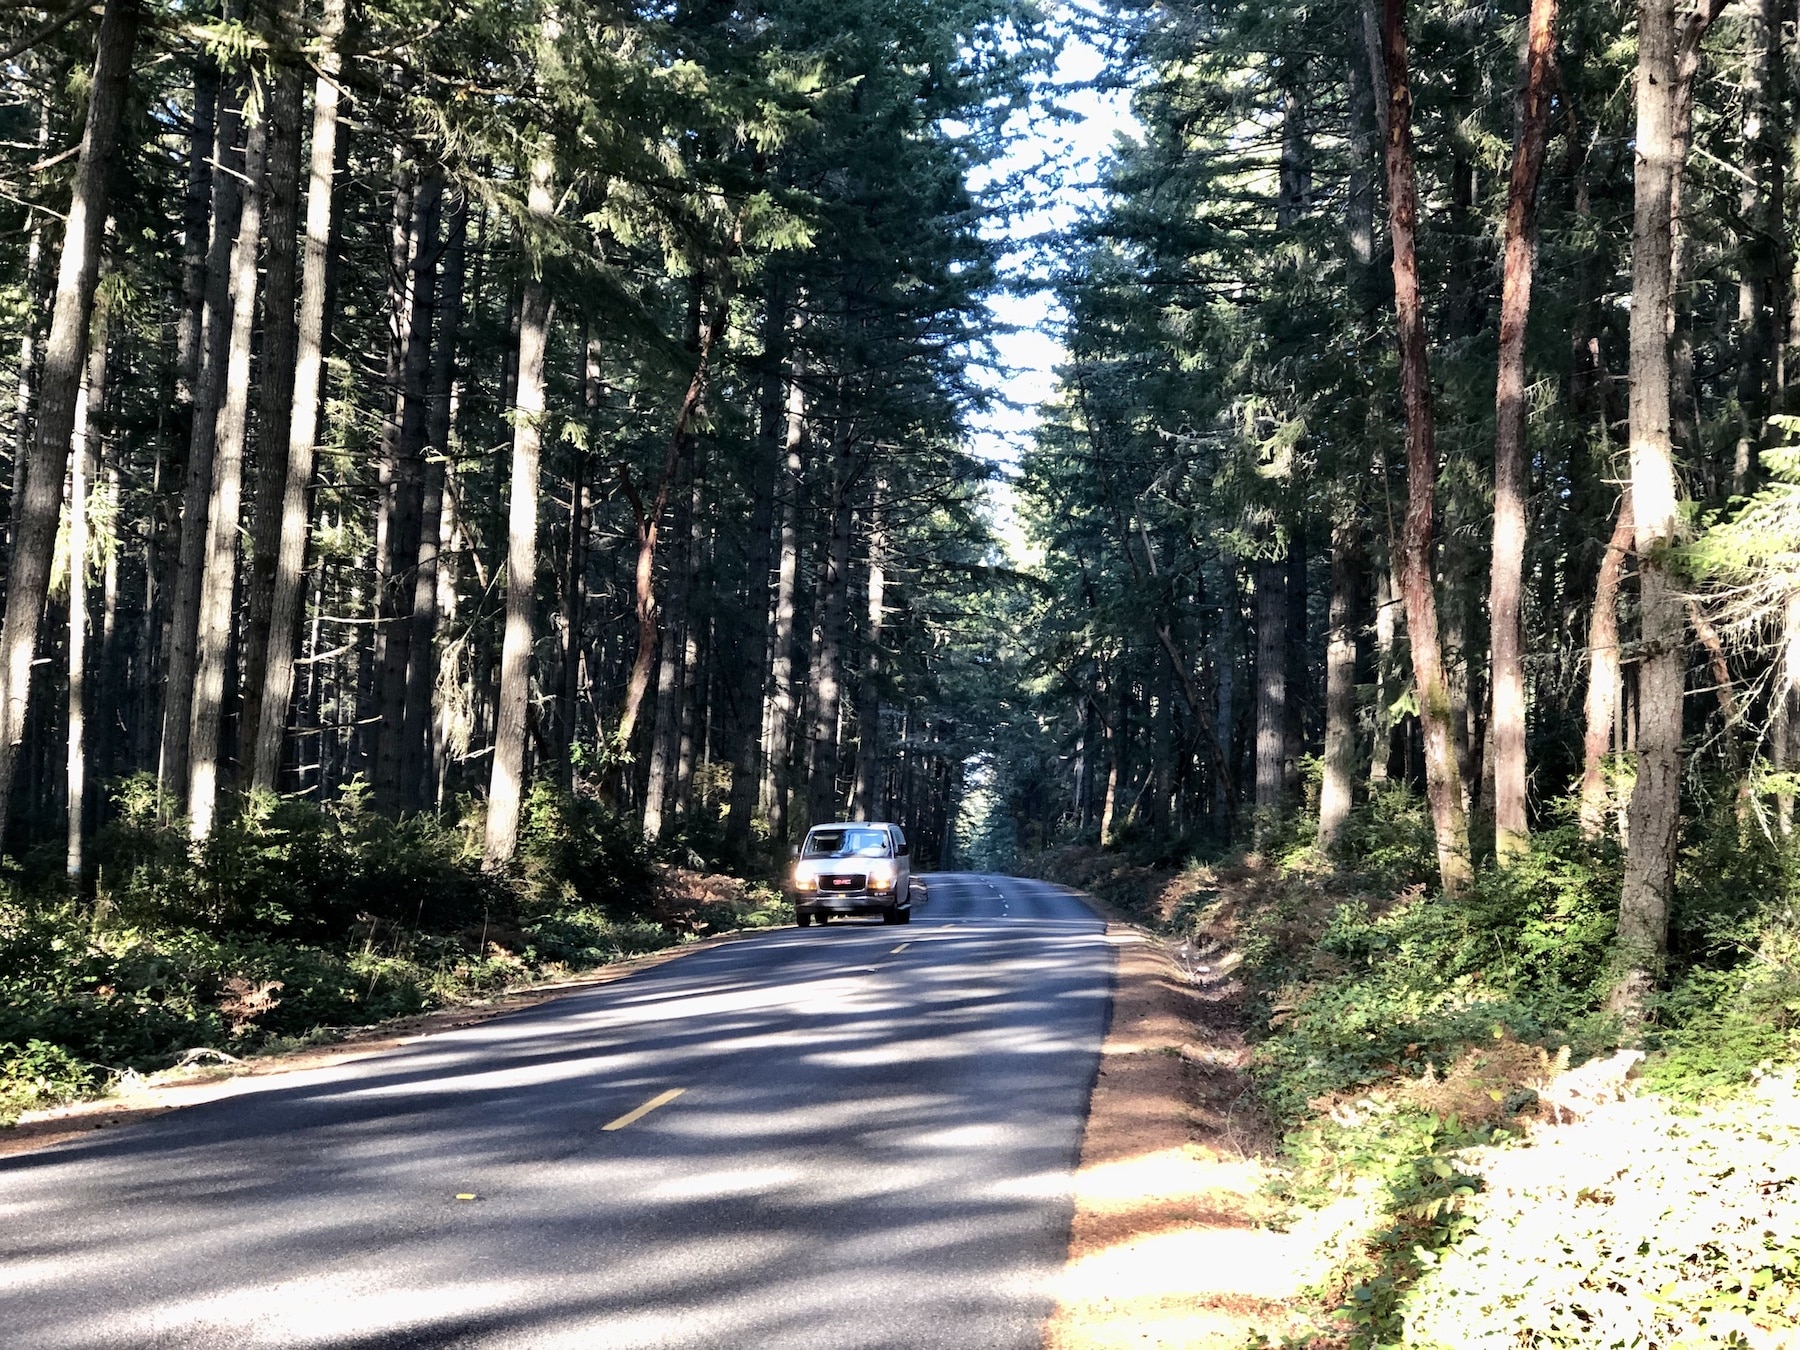 Lombard Drive cuts through the Ellis Forest Conservation Easement for much of its mile length.